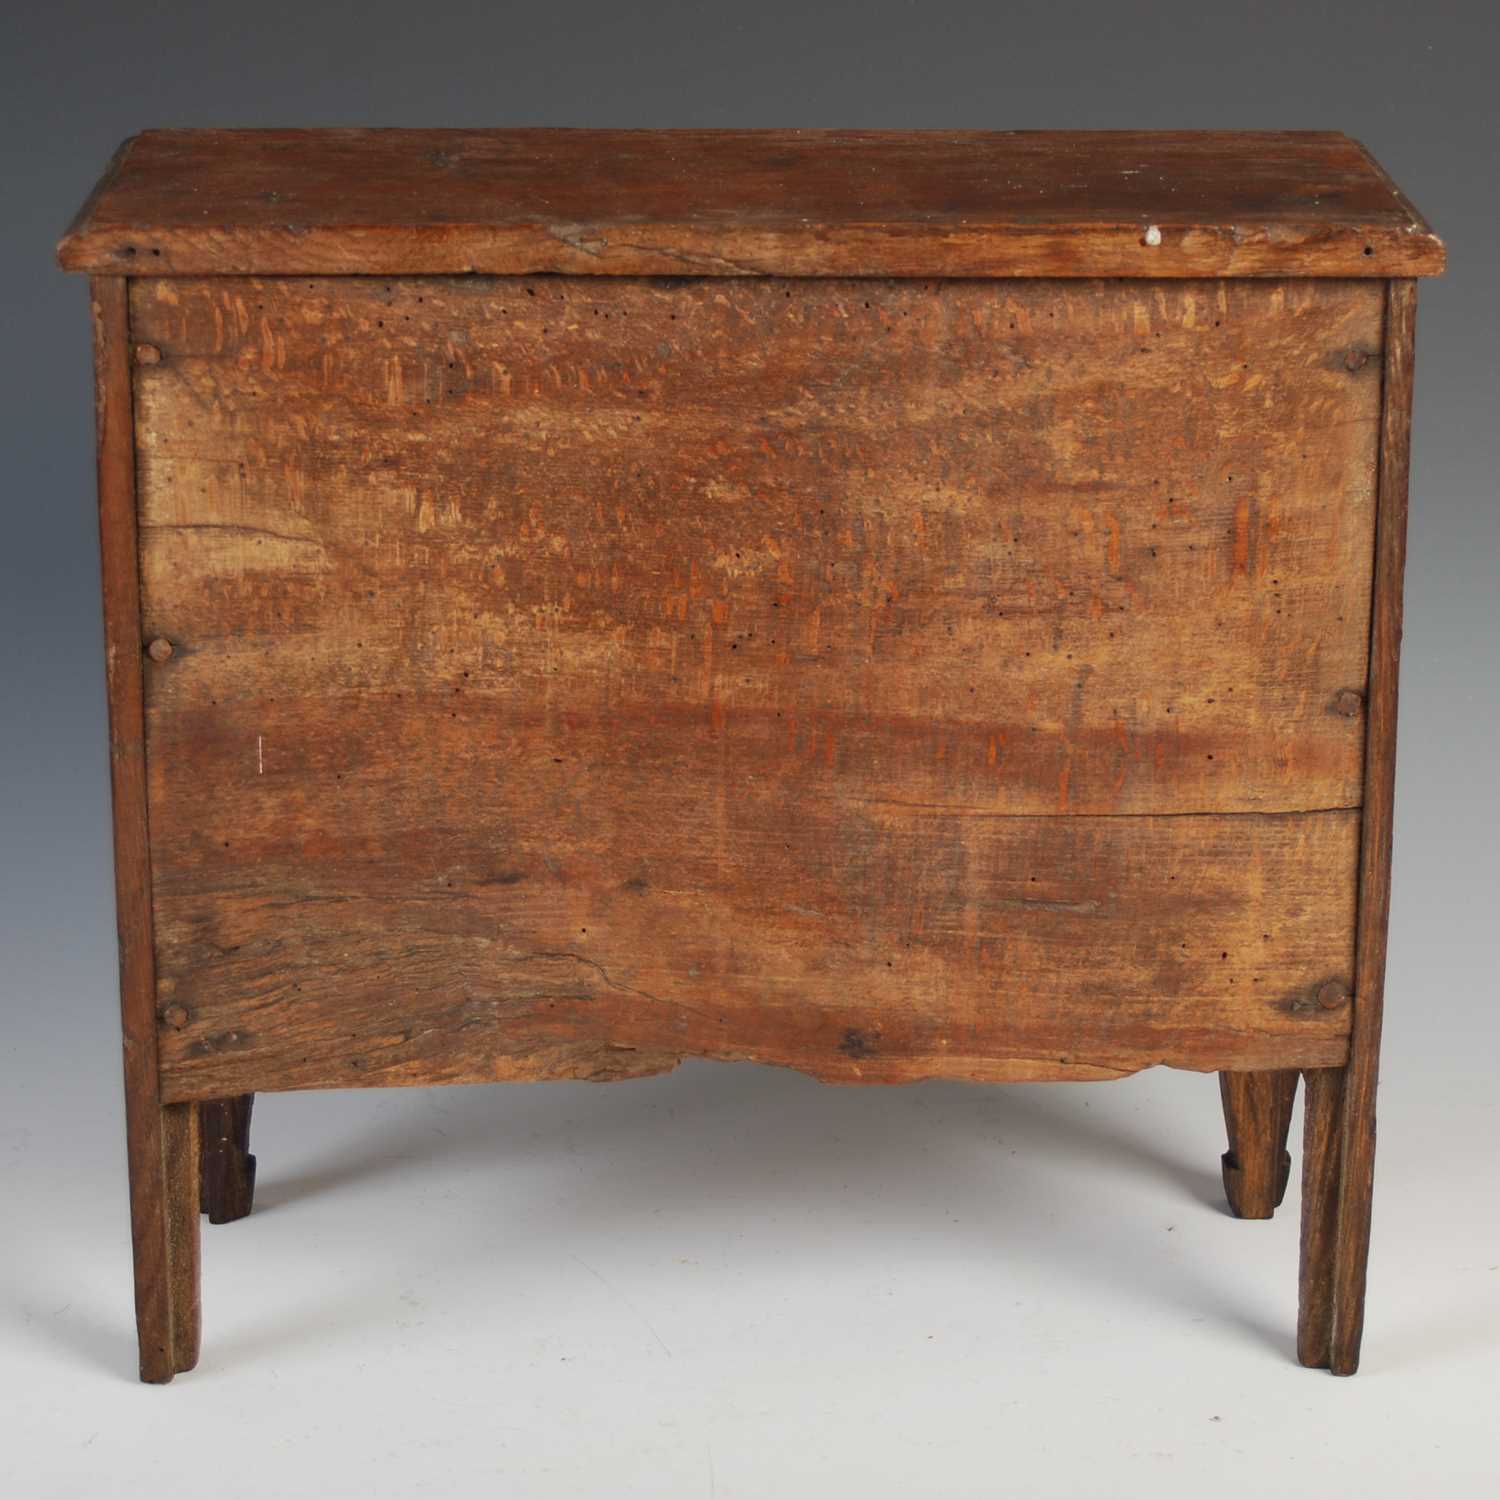 A late 18th / early 19th century French oak apprentice-made commode, the rectangular top with - Image 6 of 6